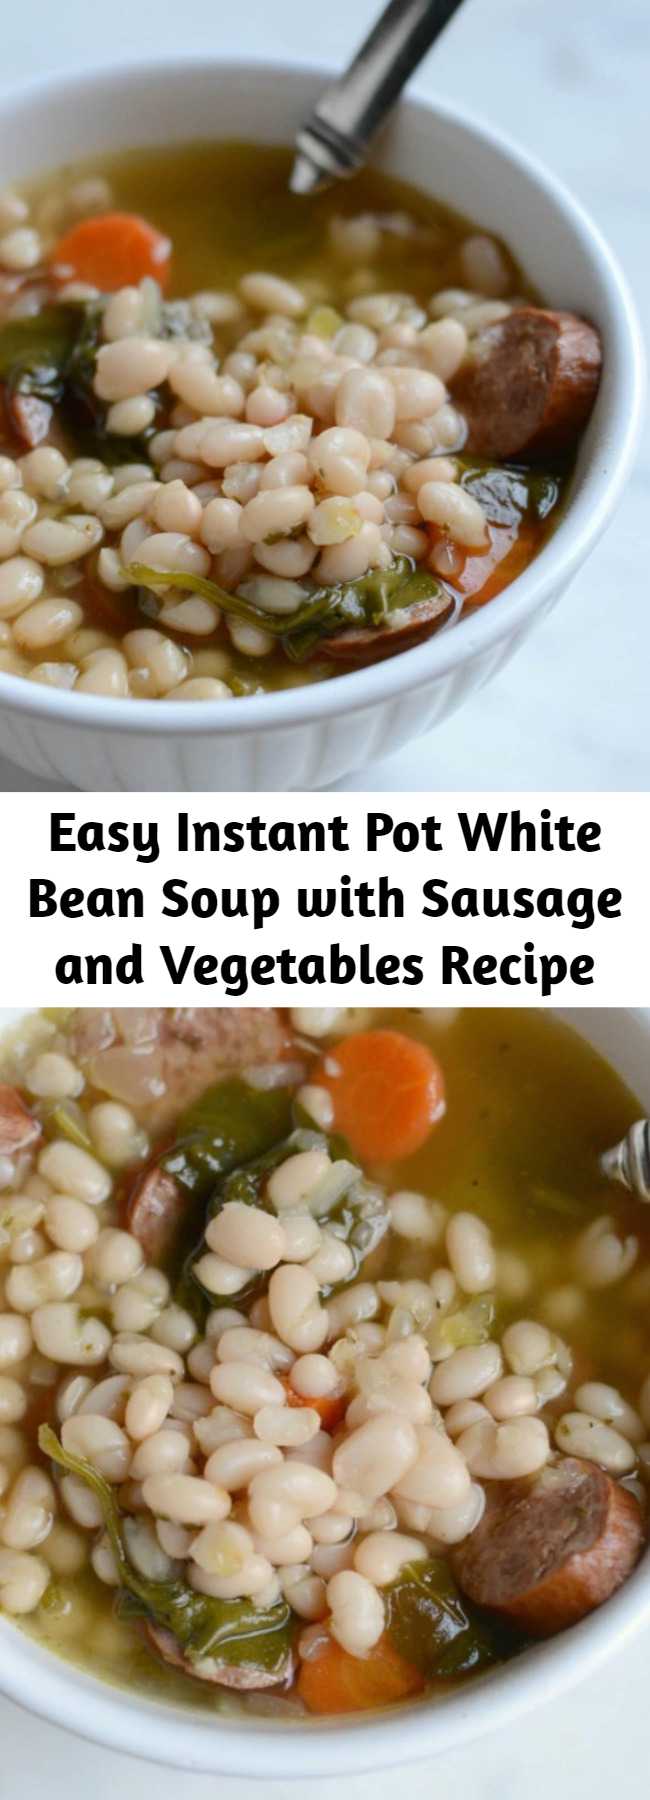 Easy Instant Pot White Bean Soup with Sausage and Vegetables Recipe - This Instant Pot soup recipe is easy, delicious and hassle-free. Made with smoked sausage, white beans, and vegetables with an herb-infused broth.